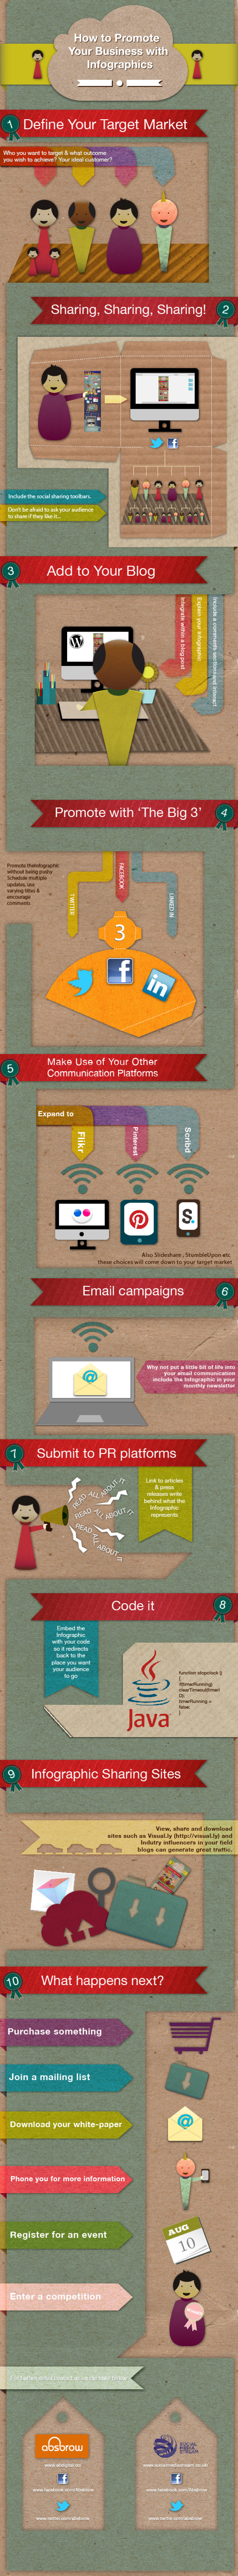 How To Promote Your Business With Infographics Infographic